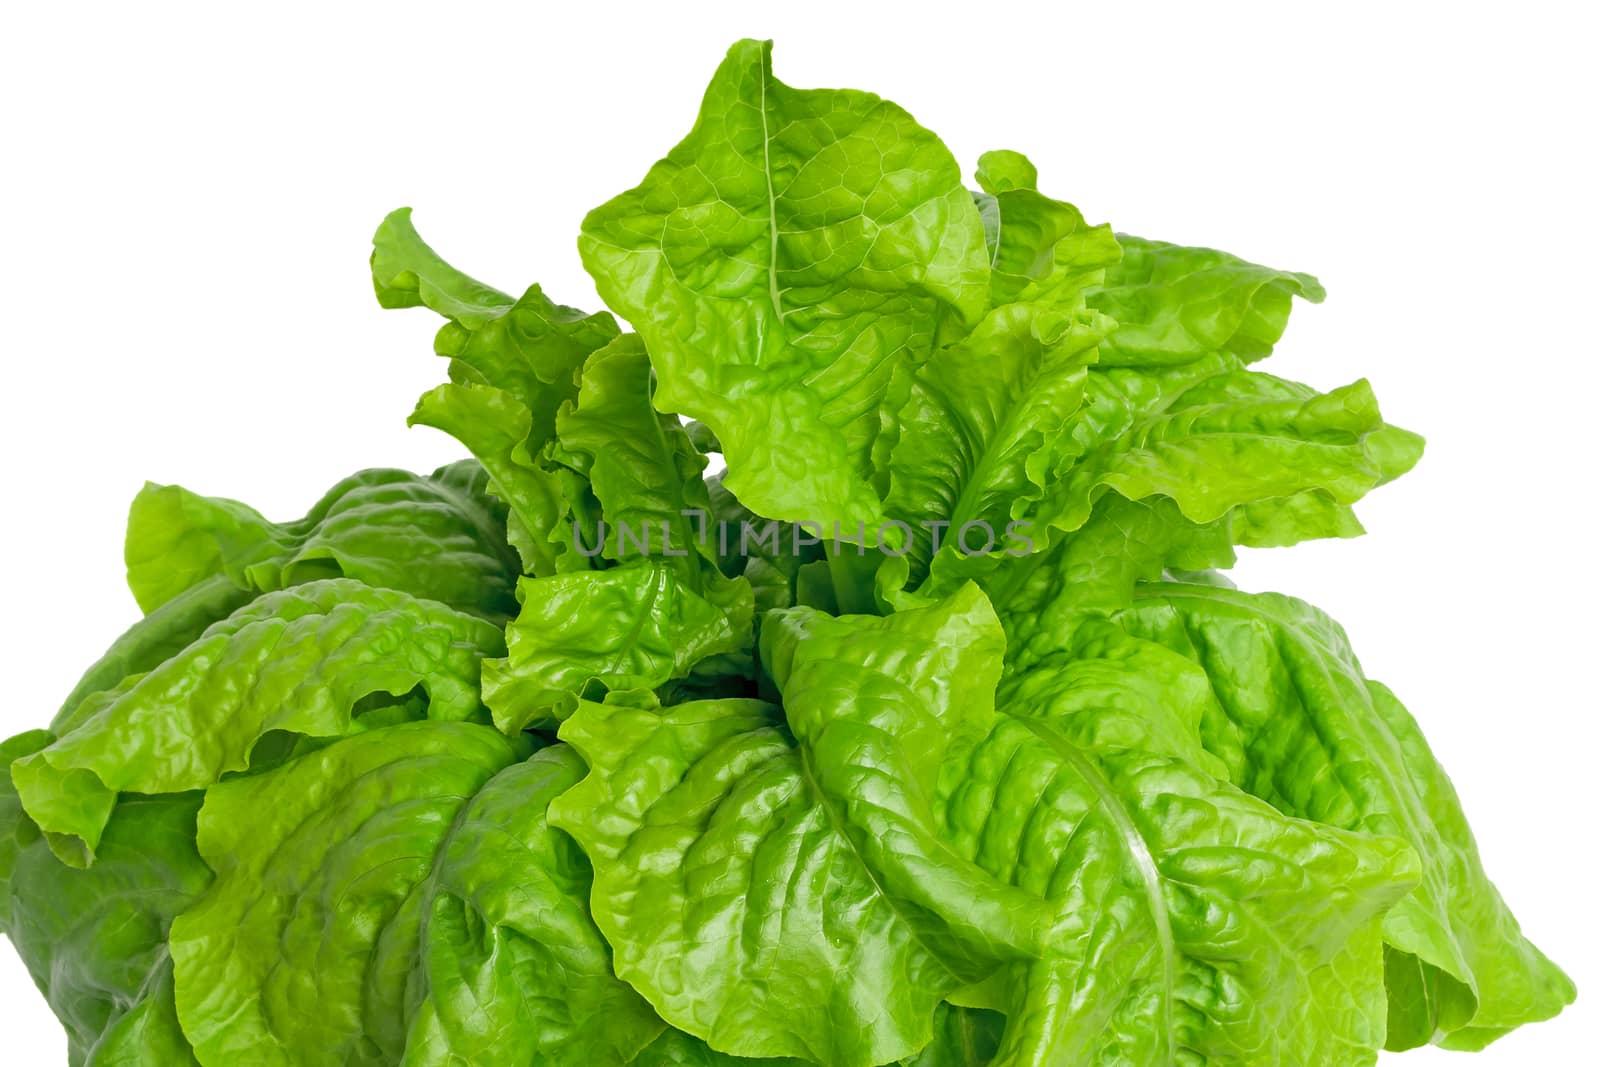 Young bright green lettuce leaves on a white background.